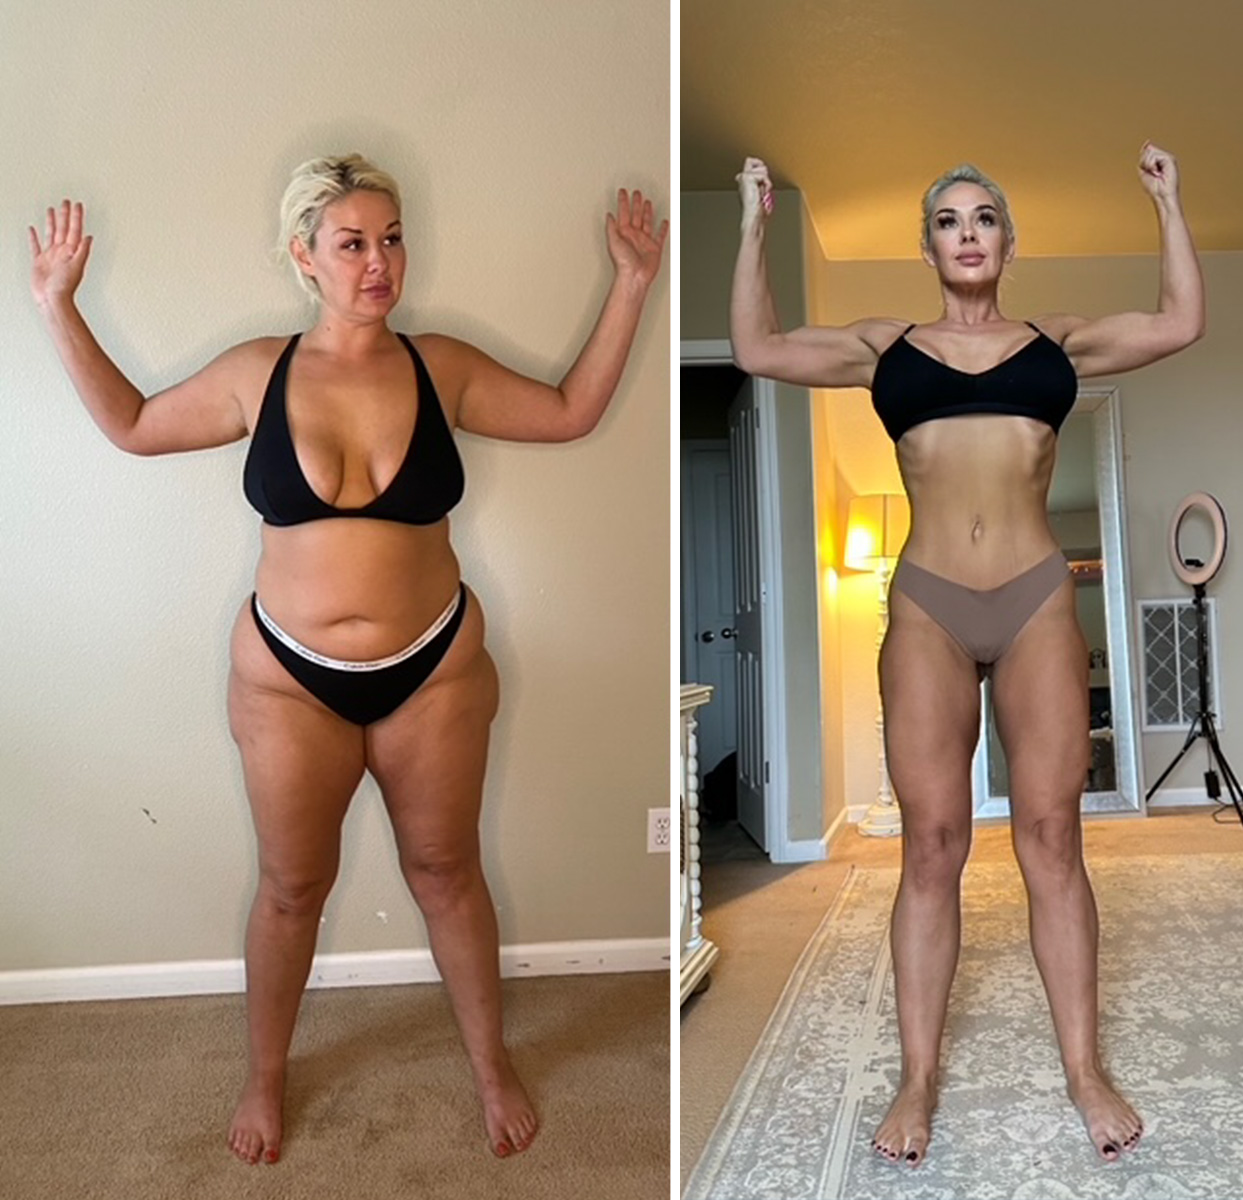 Woman Reveals How She Lost 80 Pounds In 8 Months By Eating Her Favorite Foods